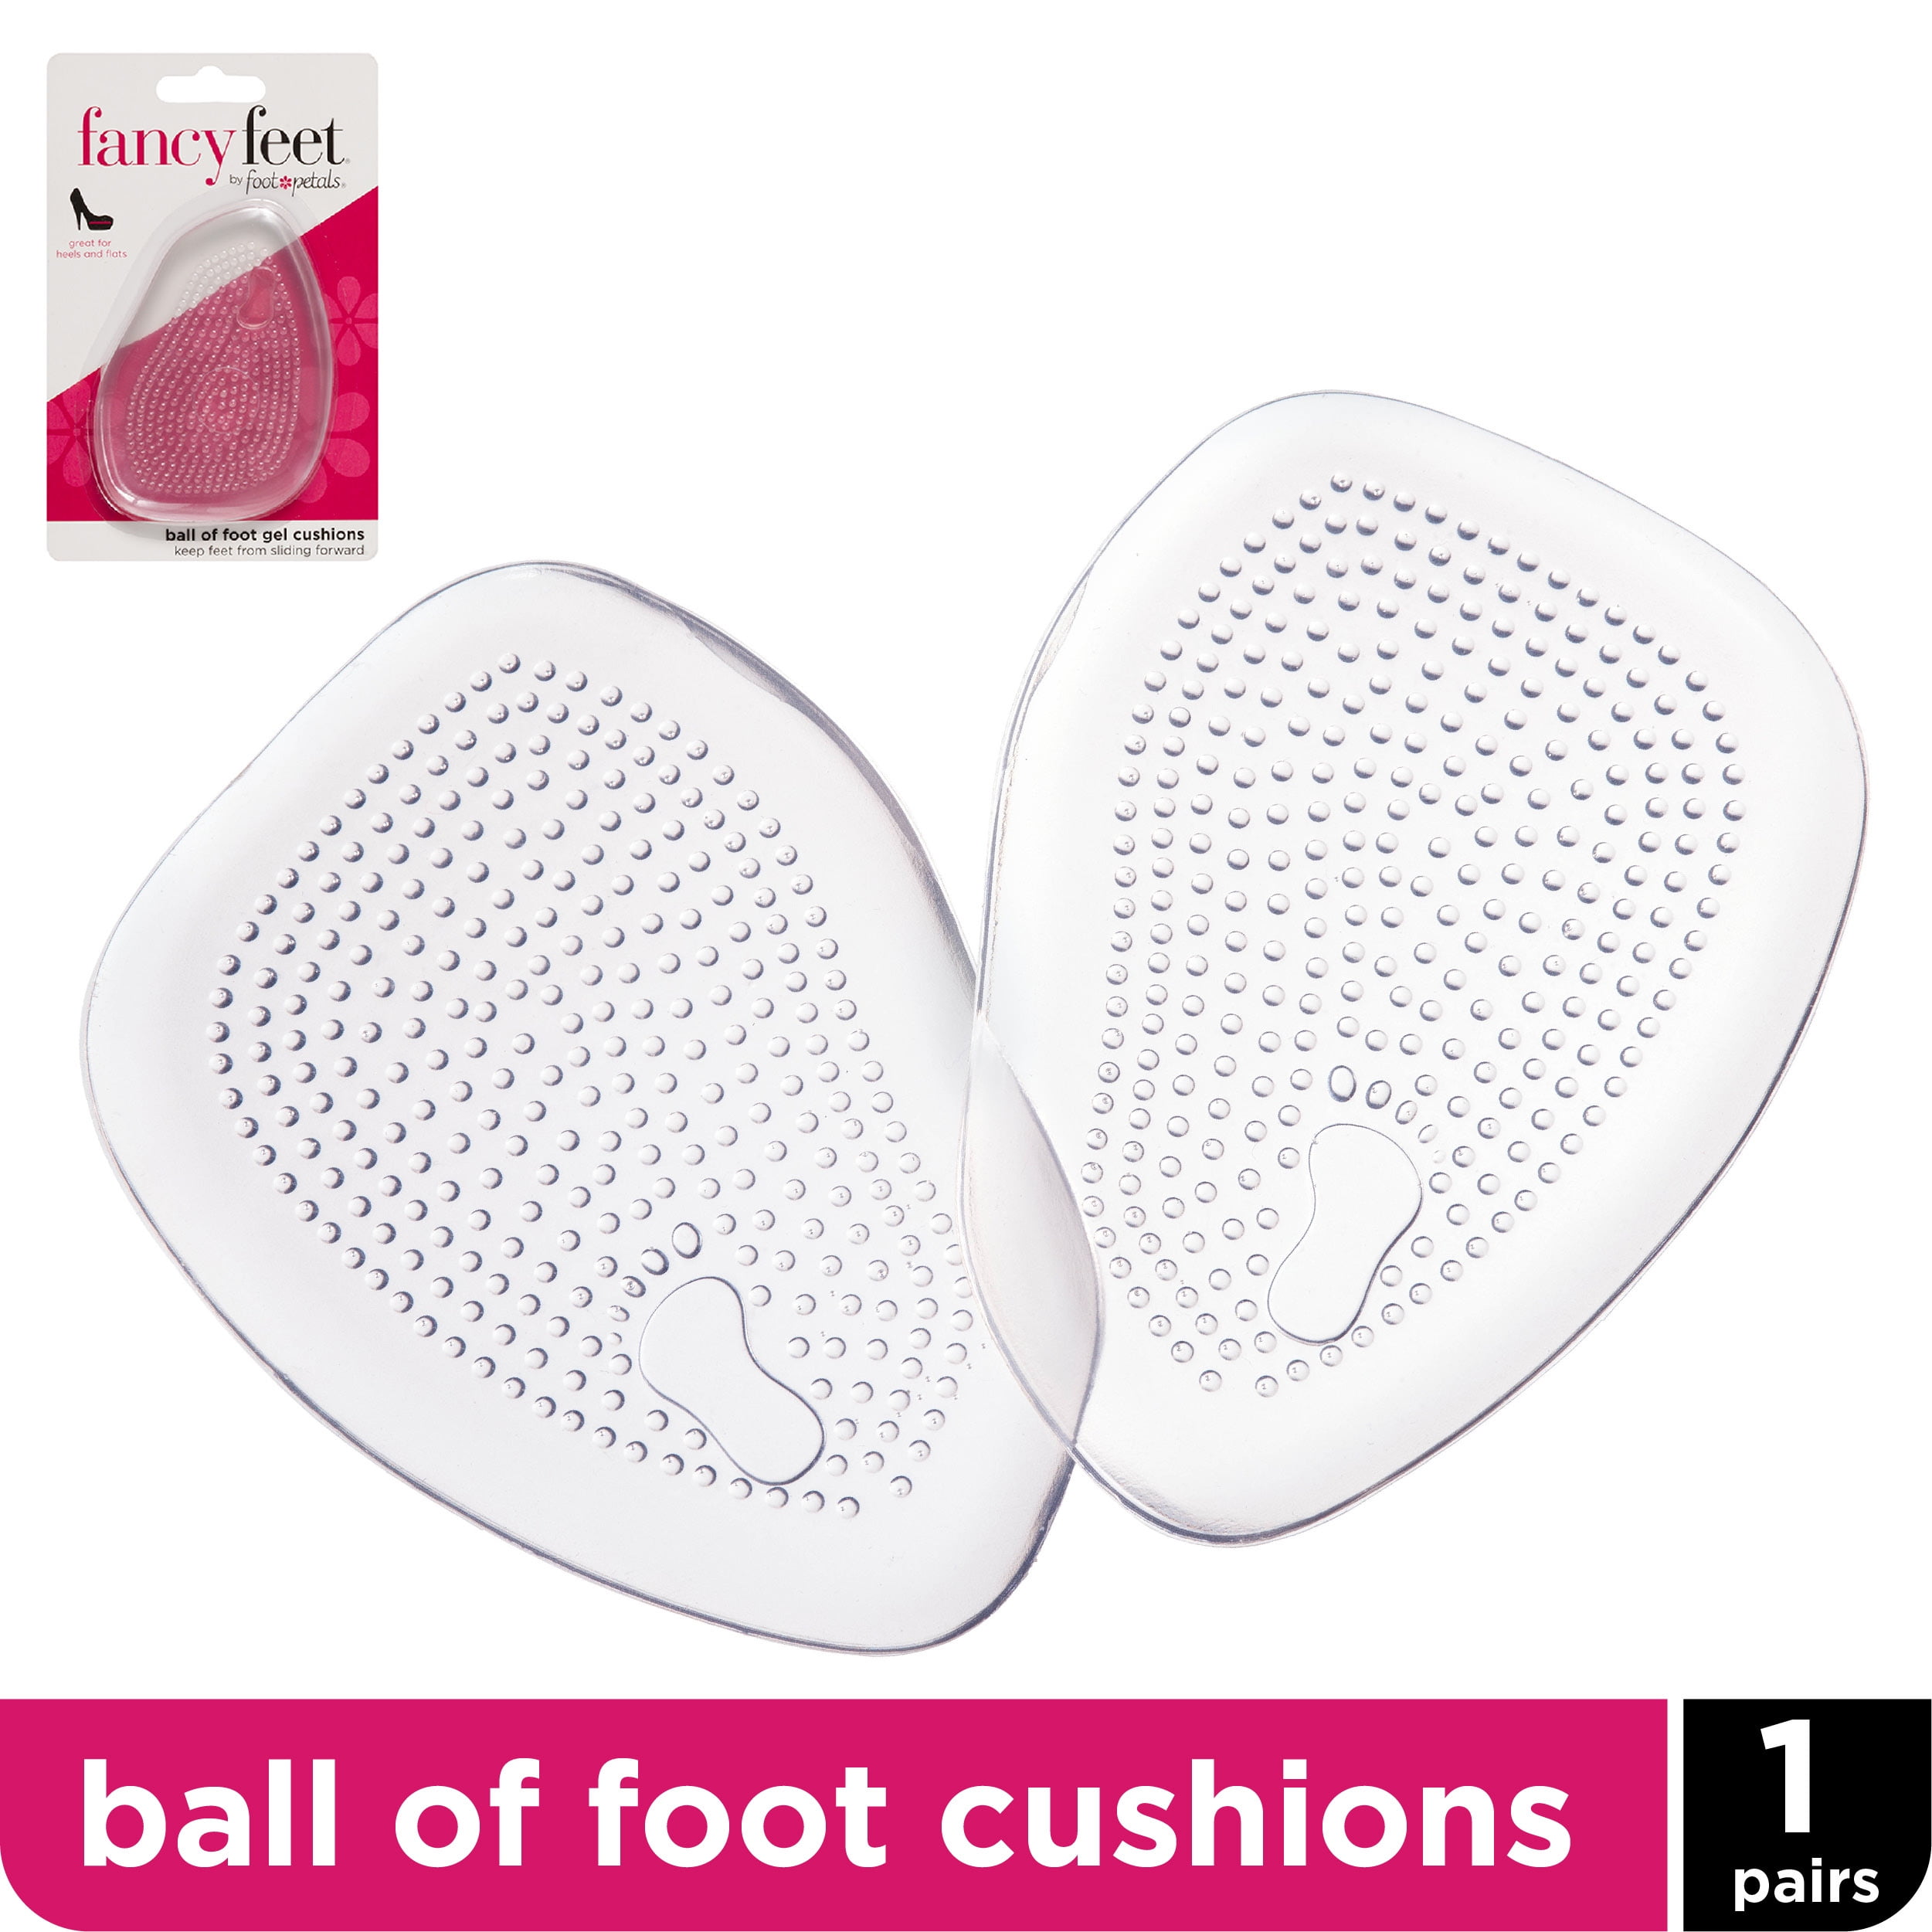 GEL CUSHION Feet Pad Insoles High Heeled Shoe Sandals Ball of Foot 10 Pairs 